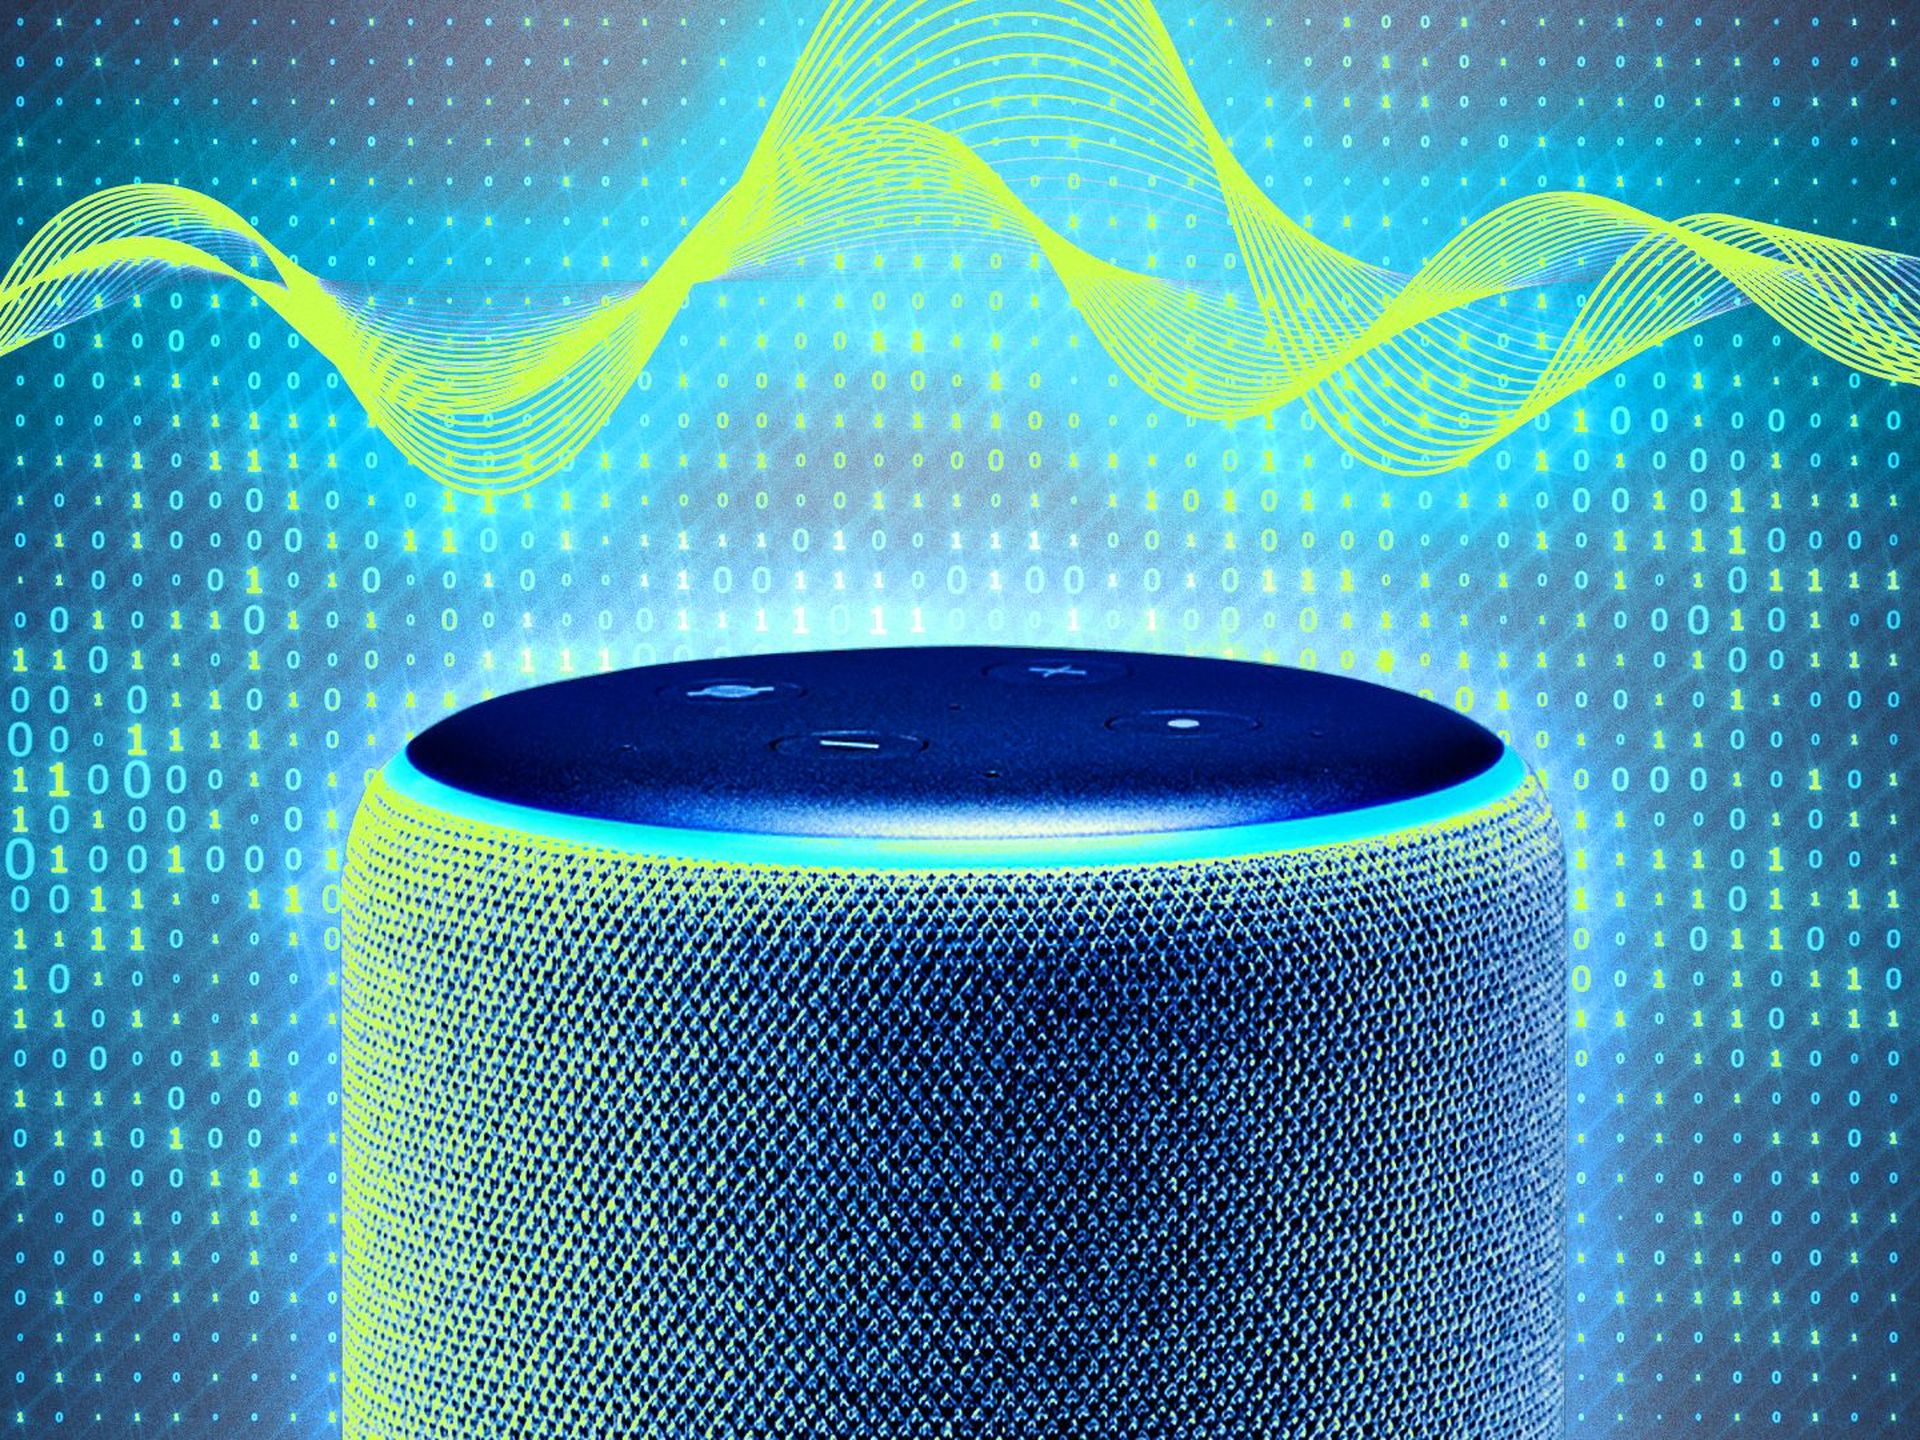 wants Alexa to bring AI into the home